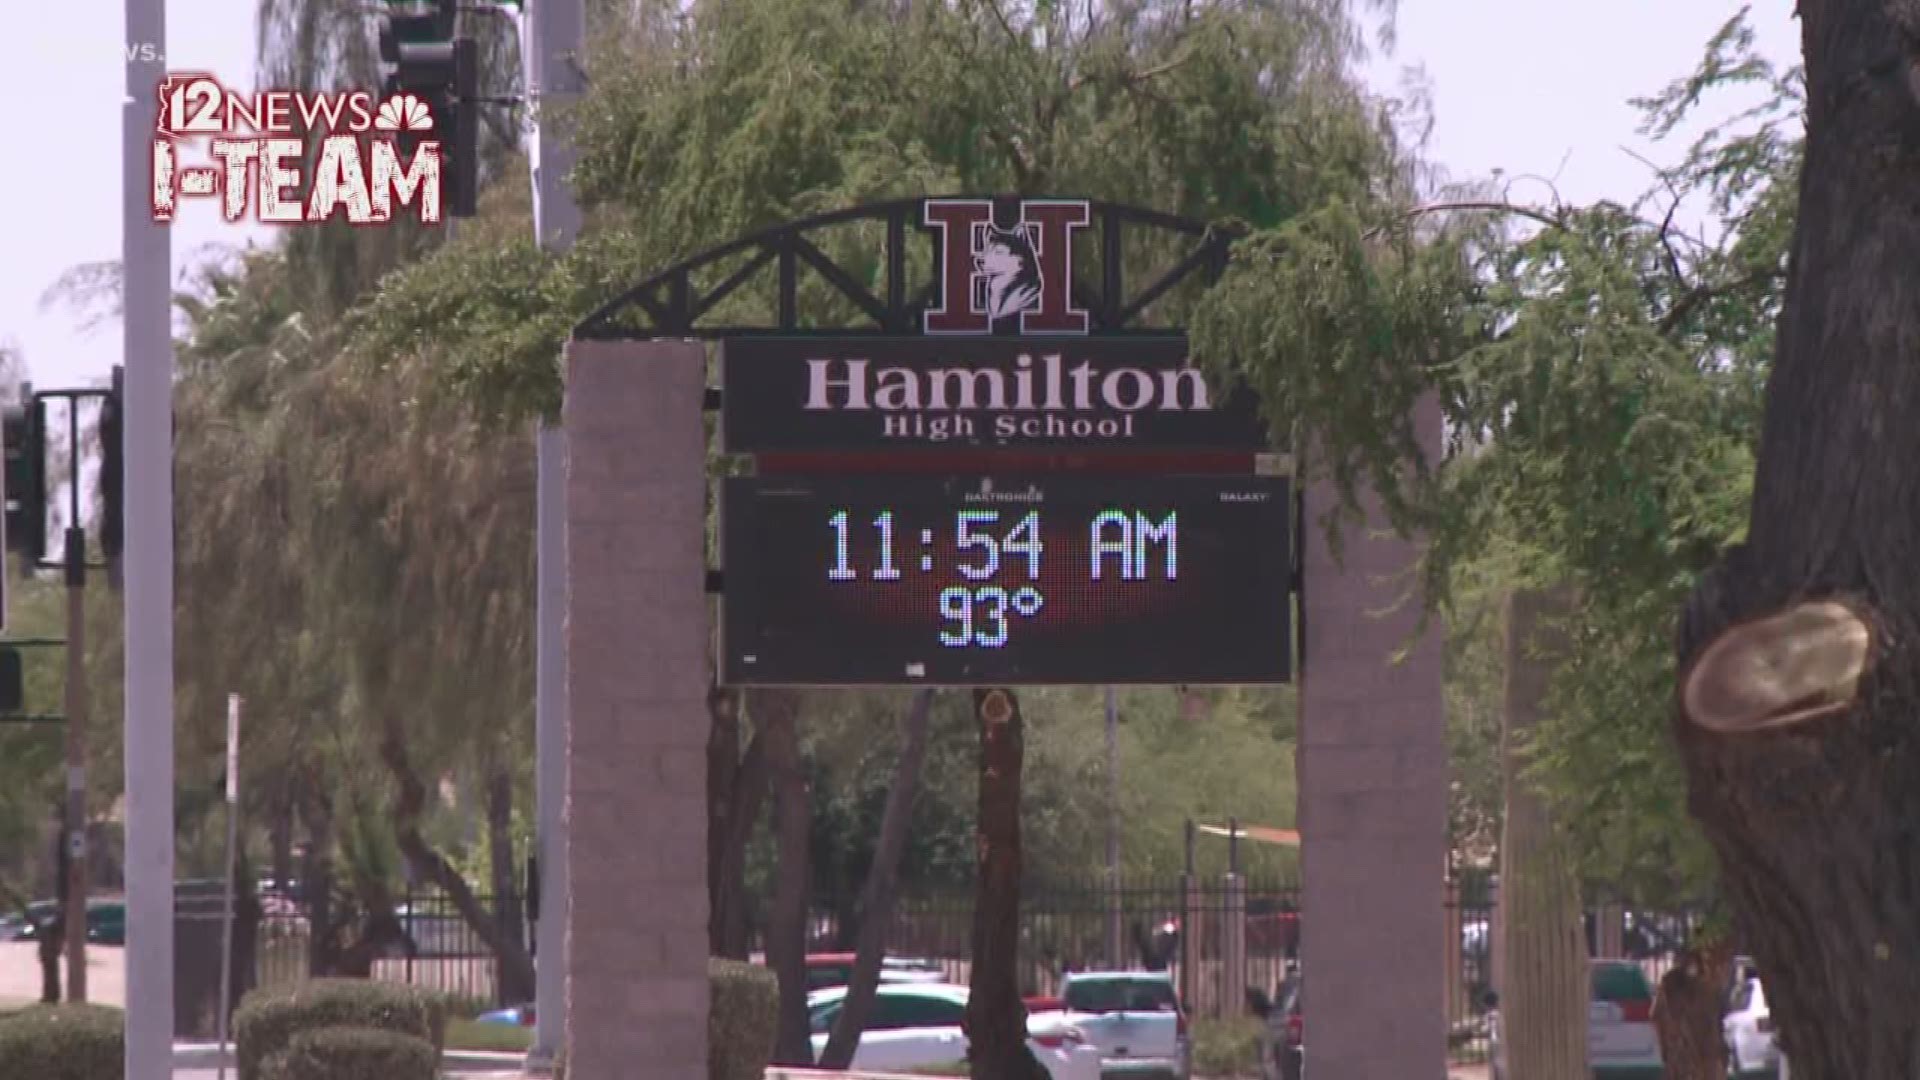 12 News I-Team poured into 700 pages of police reports, revealing more cell phone video accounts in the alleged sexual assault claims from the varsity football locker room at Hamilton High School in Chandler.